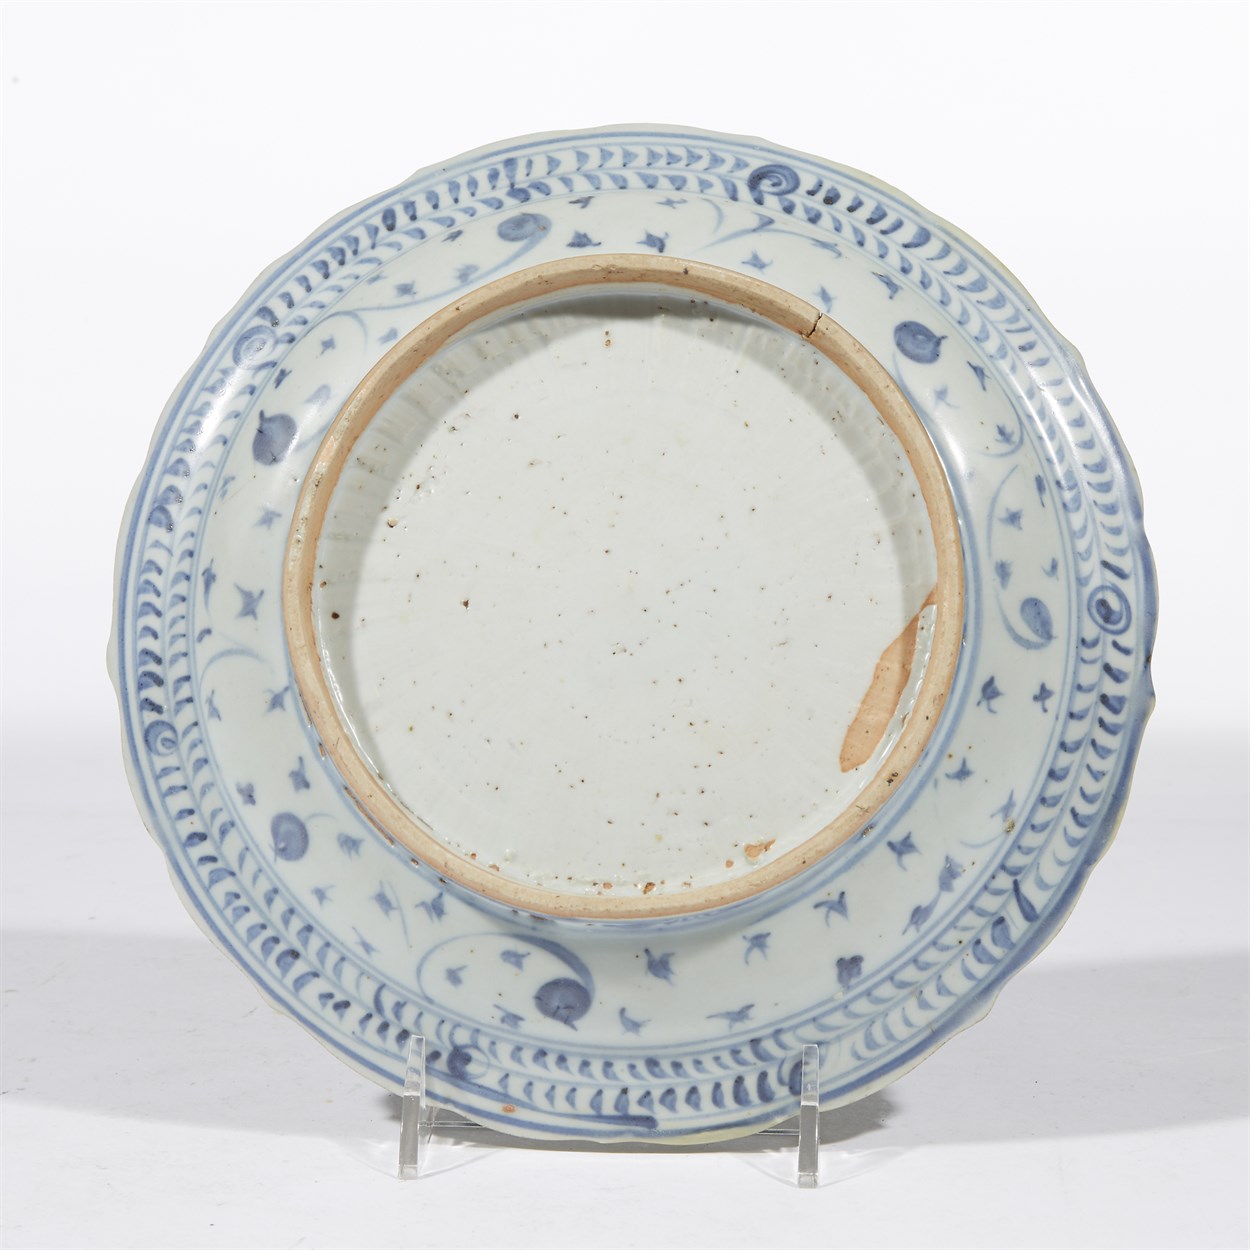 Lot 68 - A Chinese blue and white decorated porcelain plate